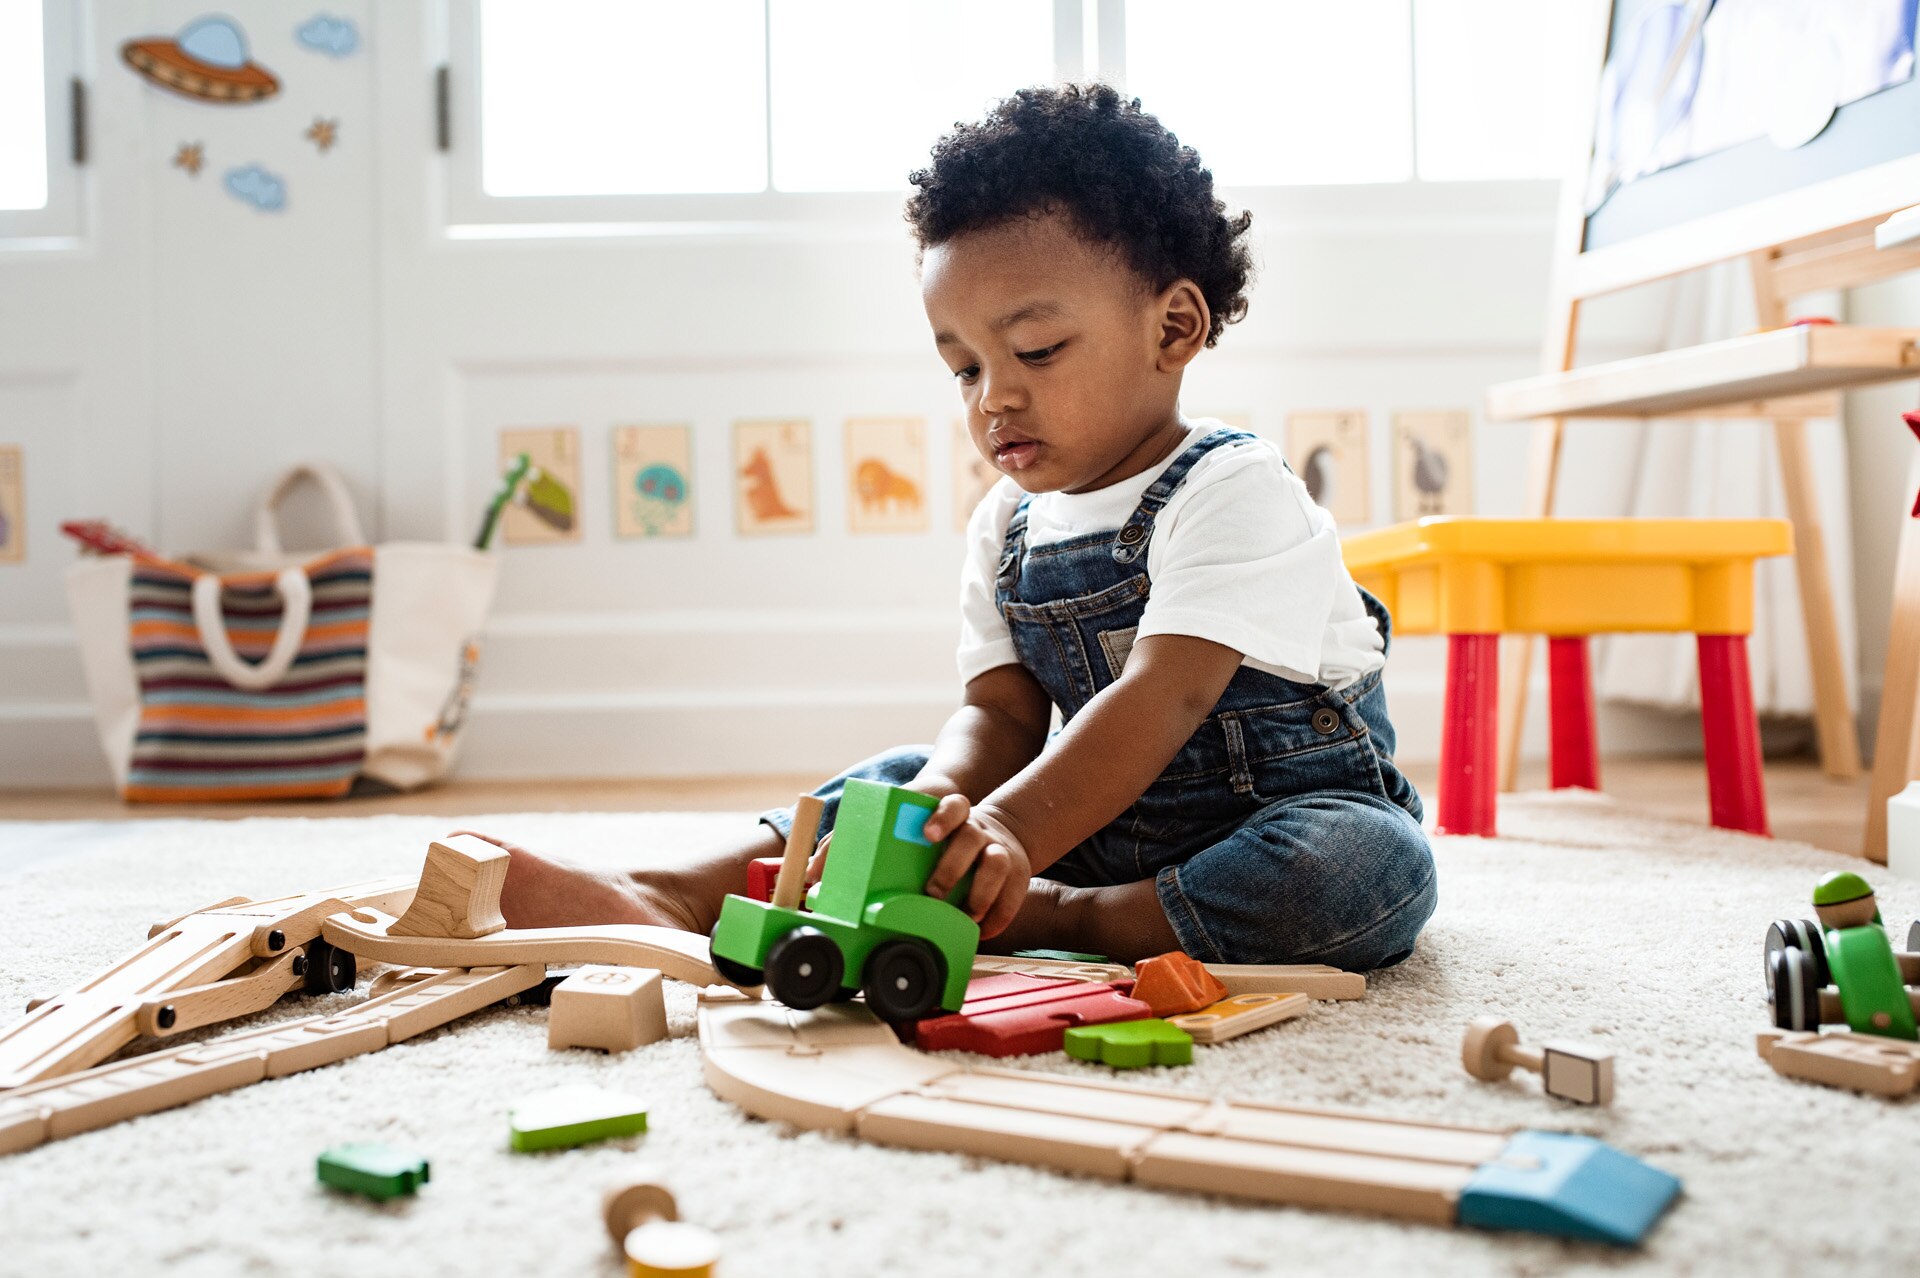 Cute little boy playing with a railroad train toy; Shutterstock ID 1248242851; purchase_order: -; job: -; client: -; other: -